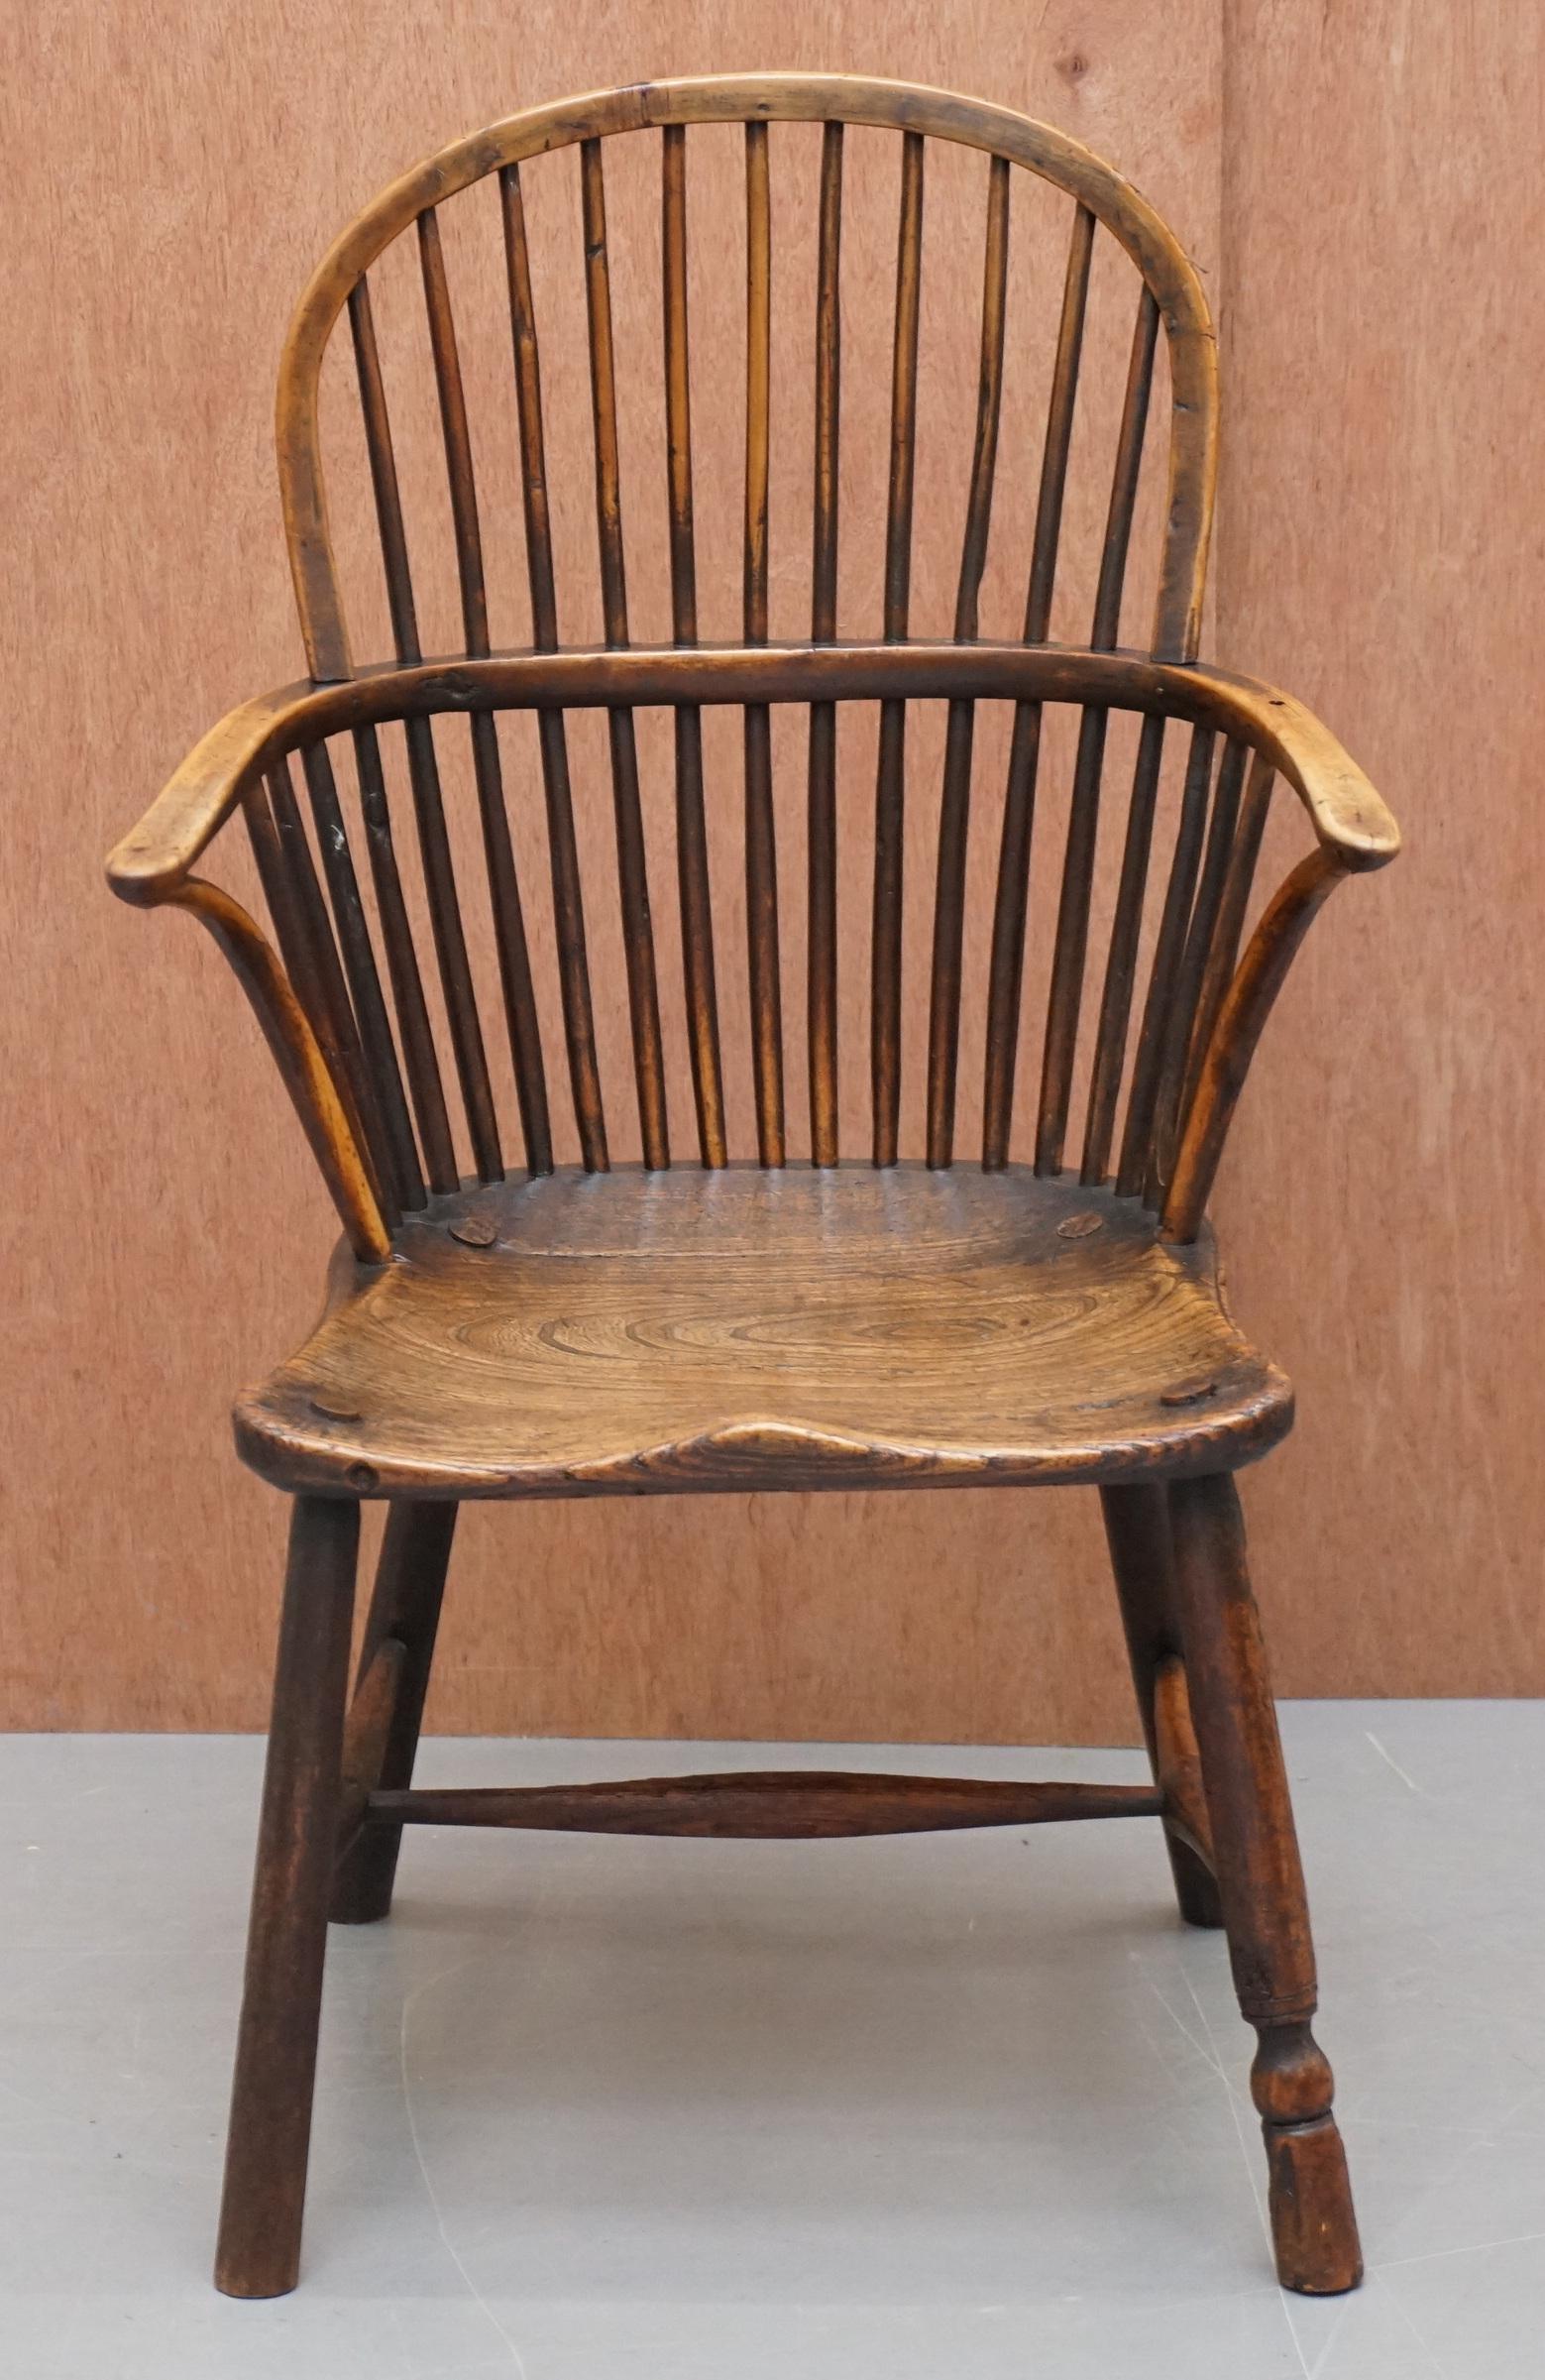 We are delighted to offer for sale this stunning circa 1800 elm hoop back west country Windsor armchair with traces of original paint

A highly coveted, well made and decorative armchair, in the traditional elm, this is an early hoop back version,